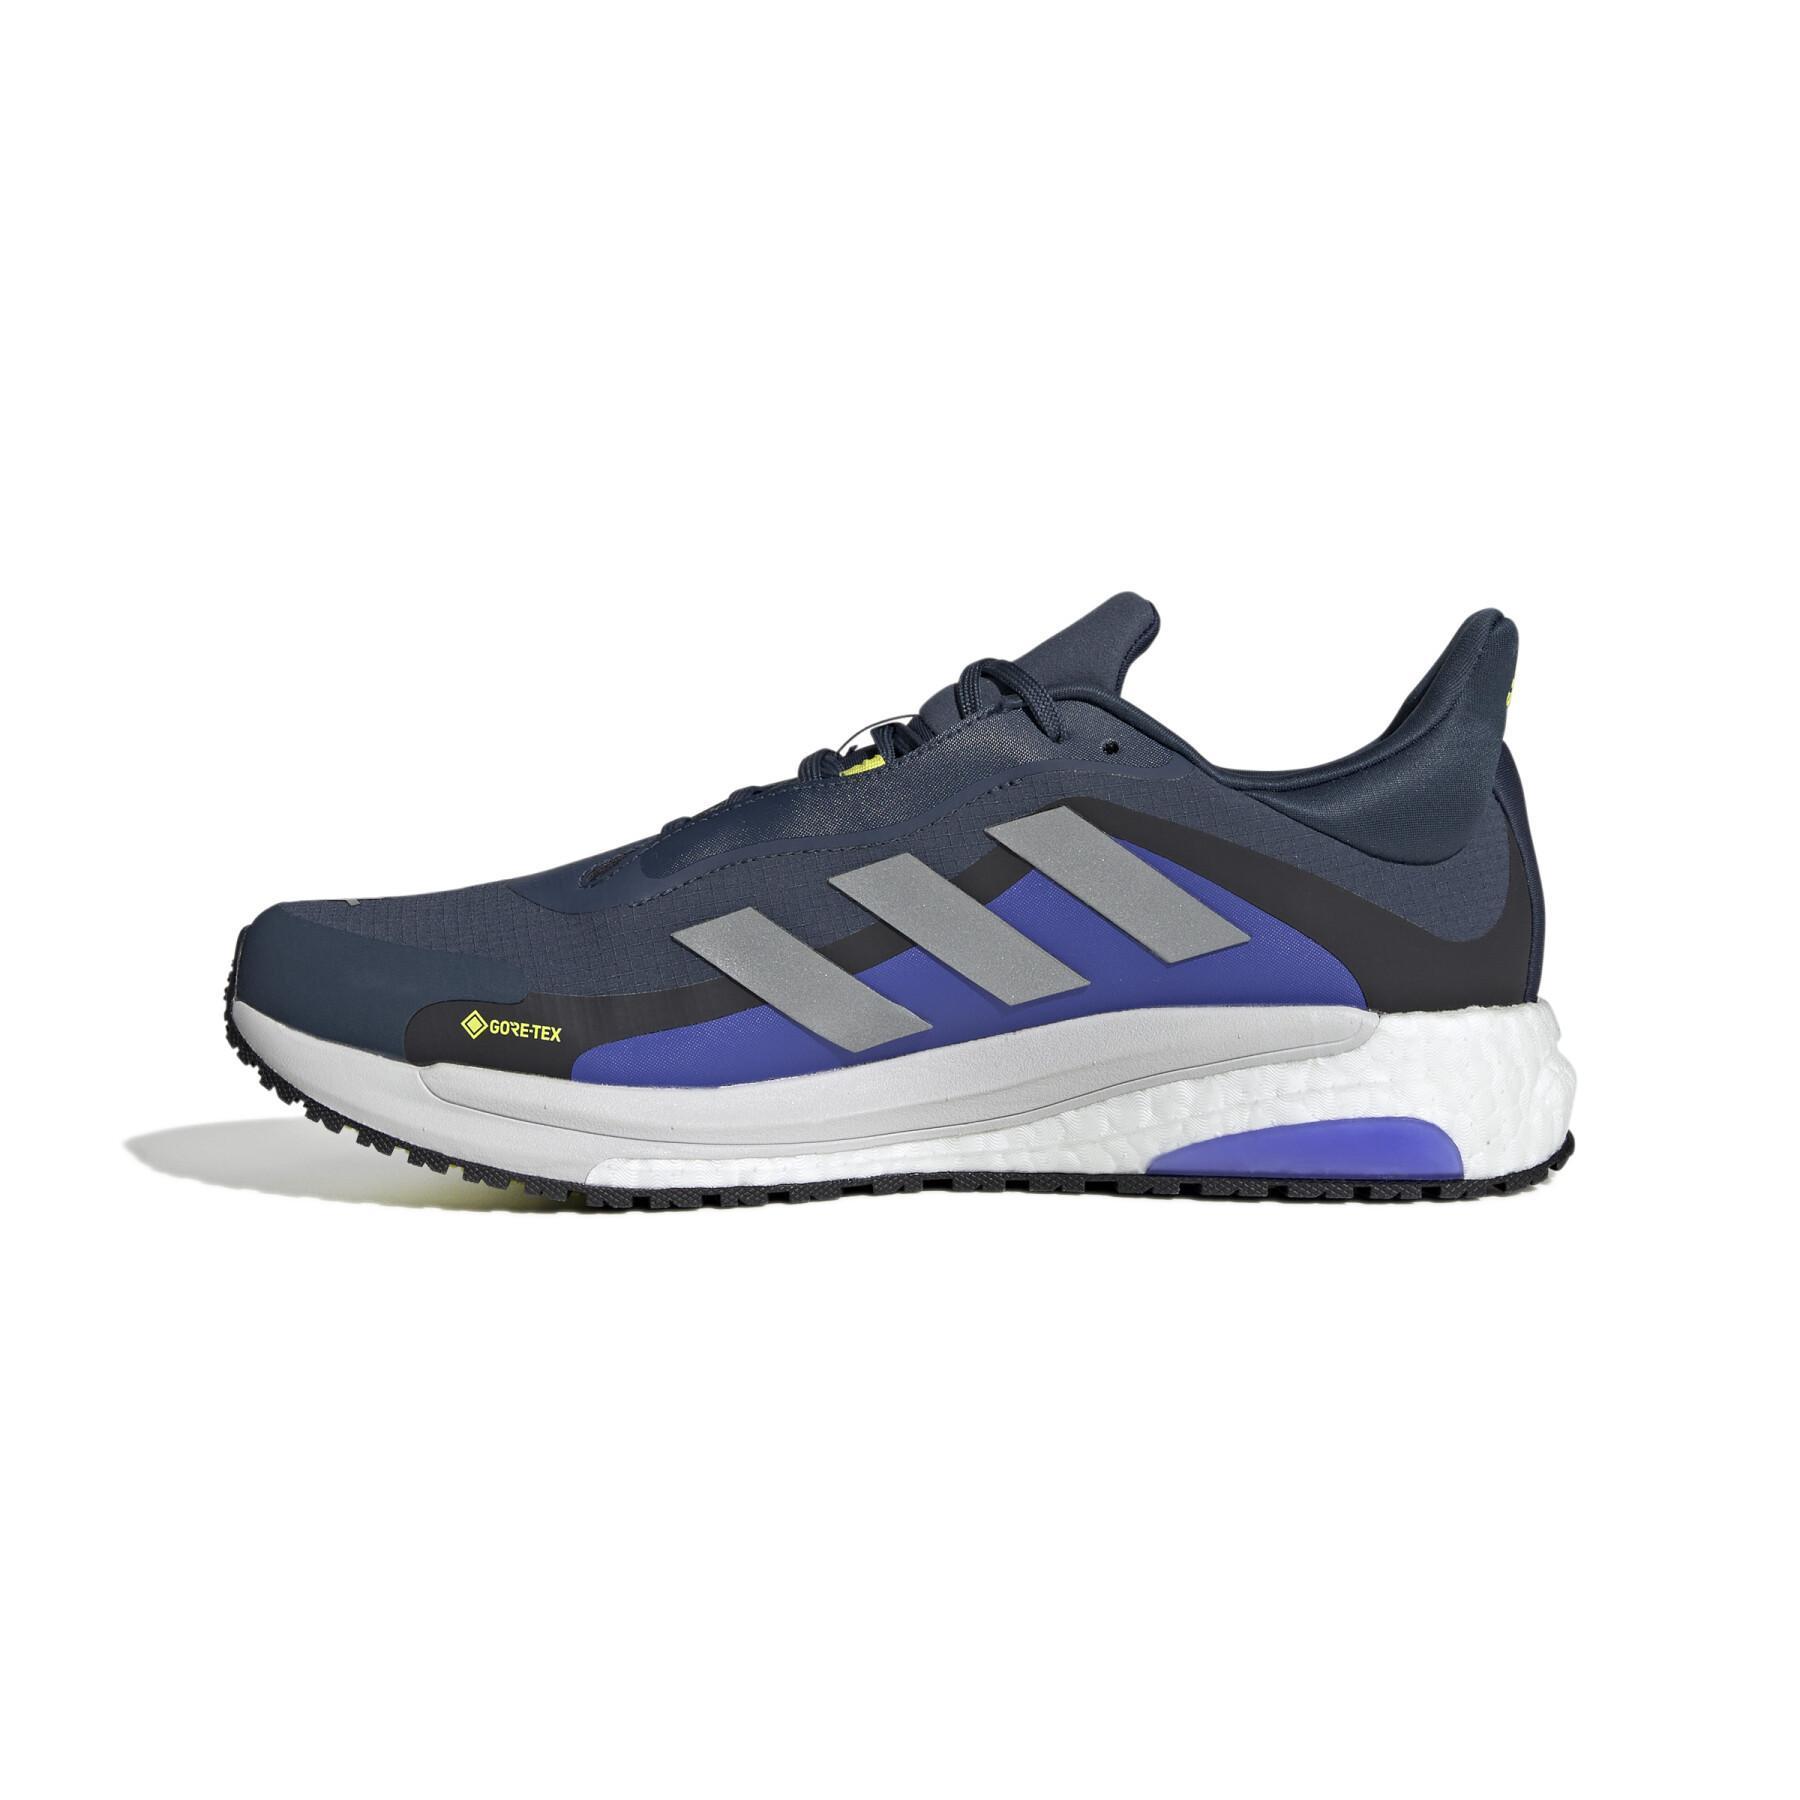 Buty adidas SolarGlide 4 GORE-TEX